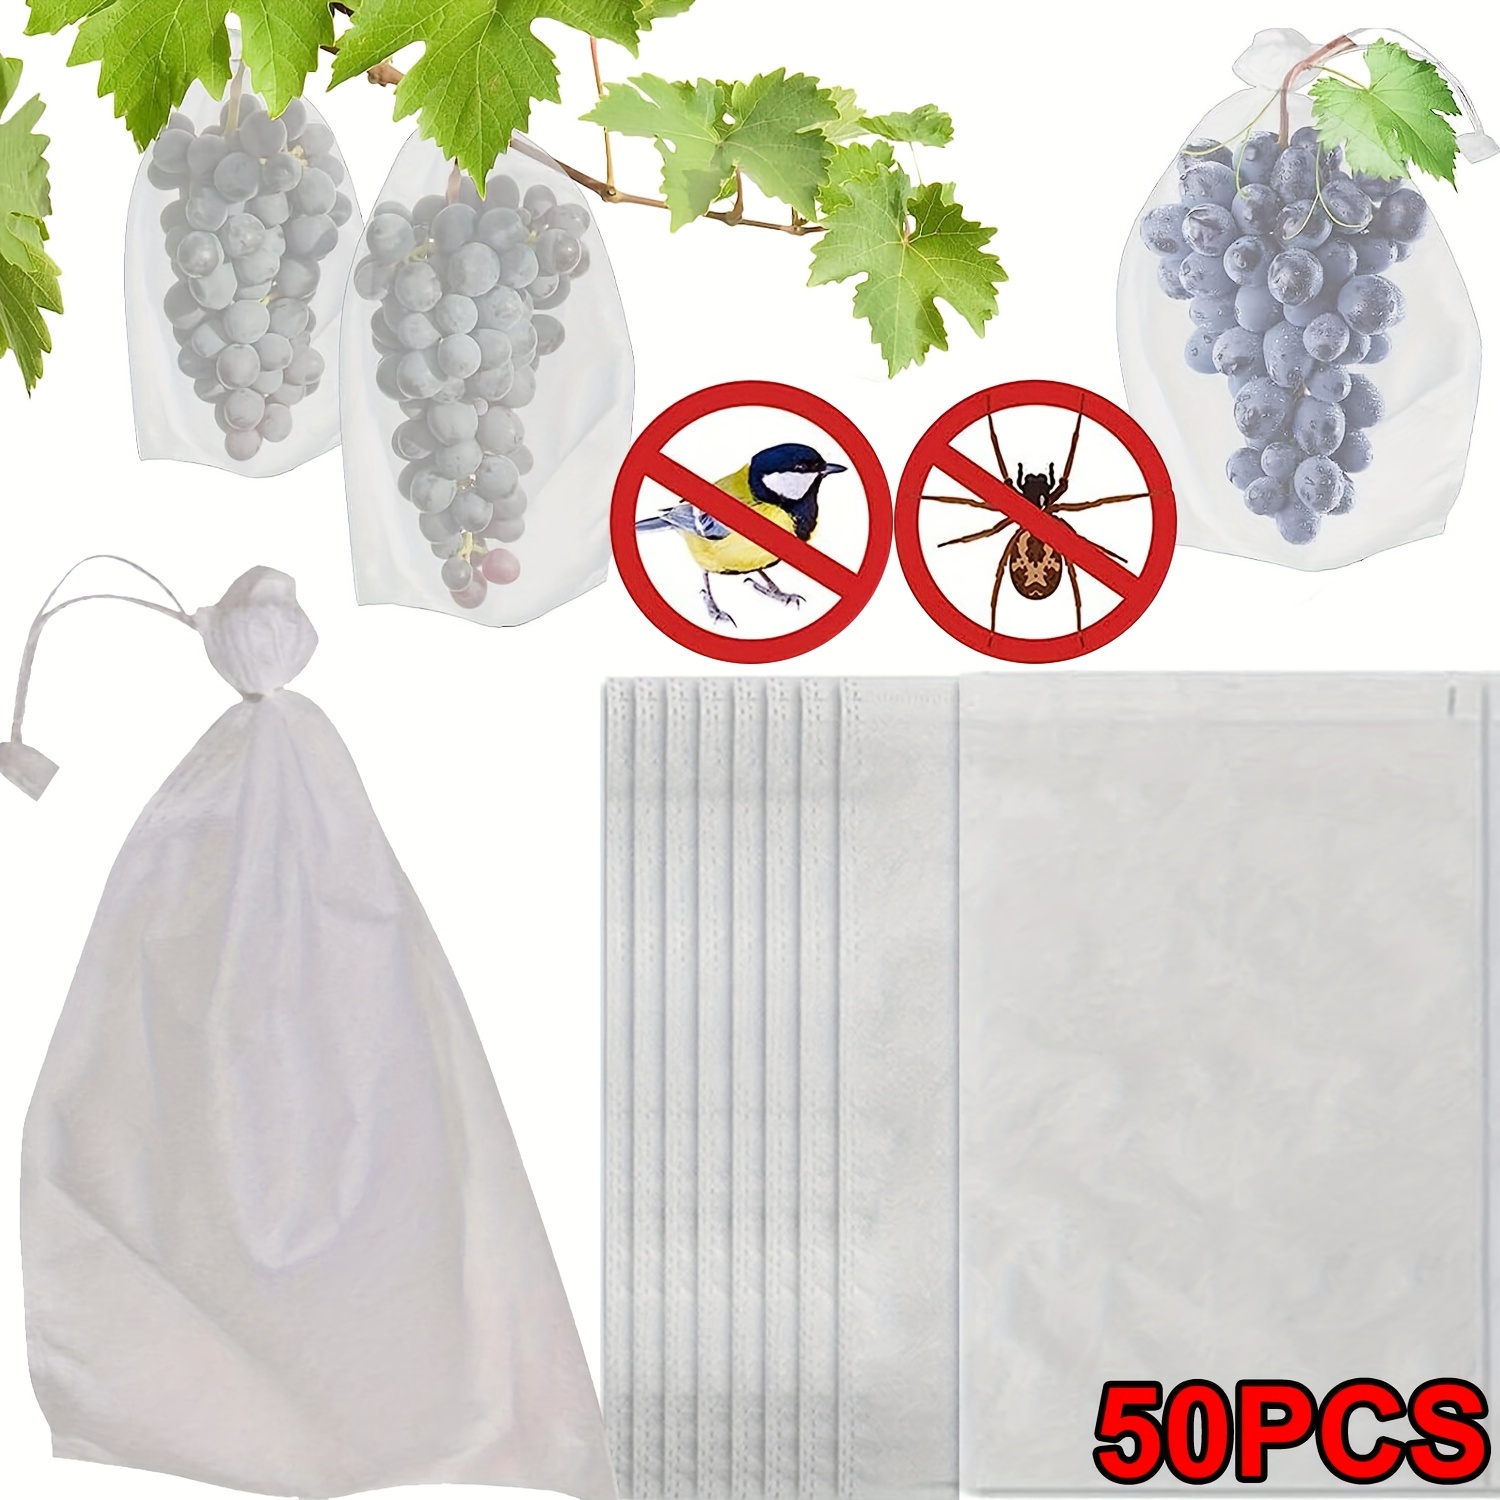 

50pcs, Fruit Protection Bags With Drawstring Reusable Garden Plant Covers Fruit Storage Bags Non-woven Insect Bird Barrier Bag For Grapes Mango Fruit Trees Veggies Garden